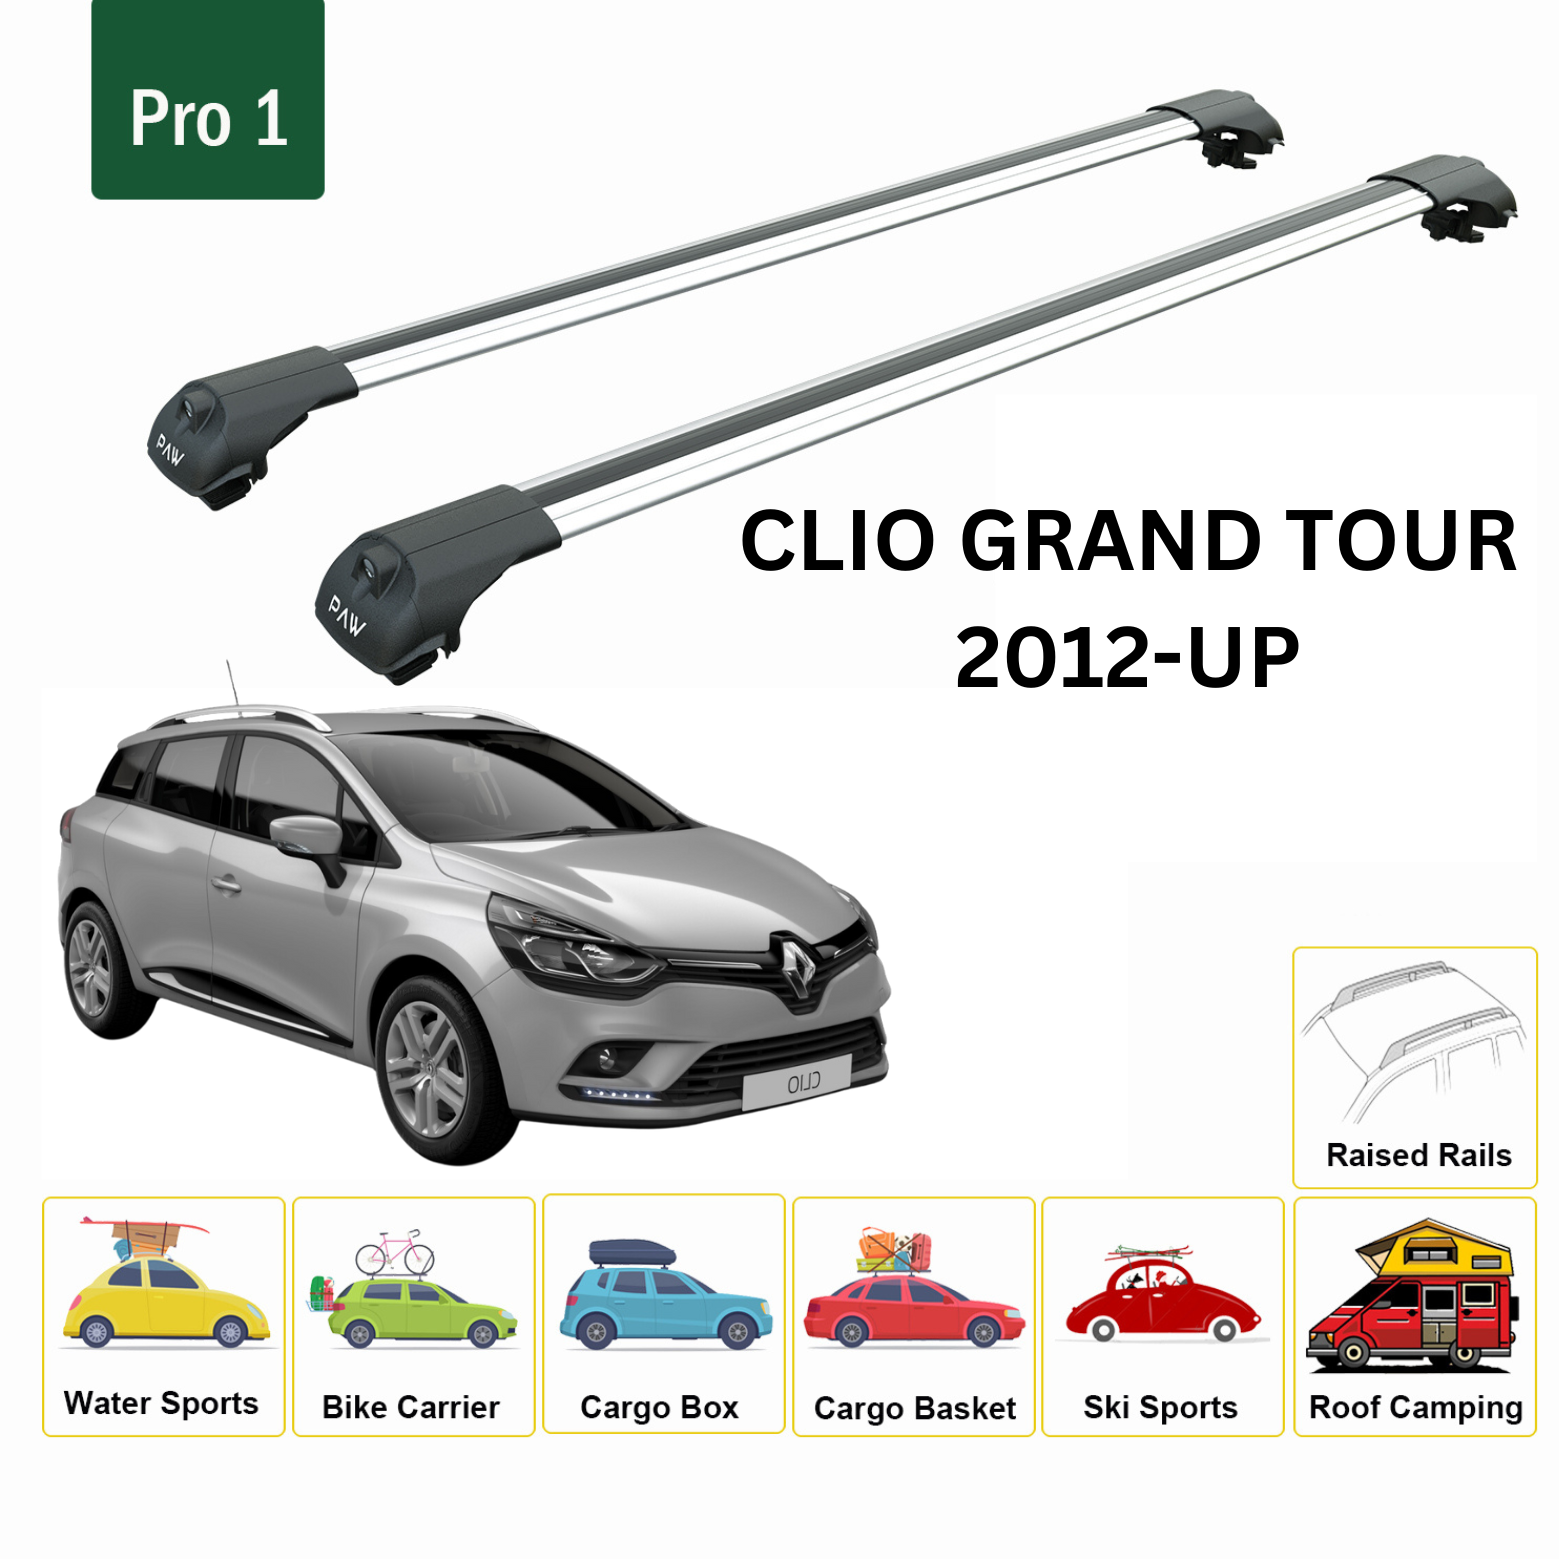 For Renault Clio Grand Tour 2012-Up Roof Rack System, Aluminium Cross Bar, Metal Bracket, Normal Roof, Silver